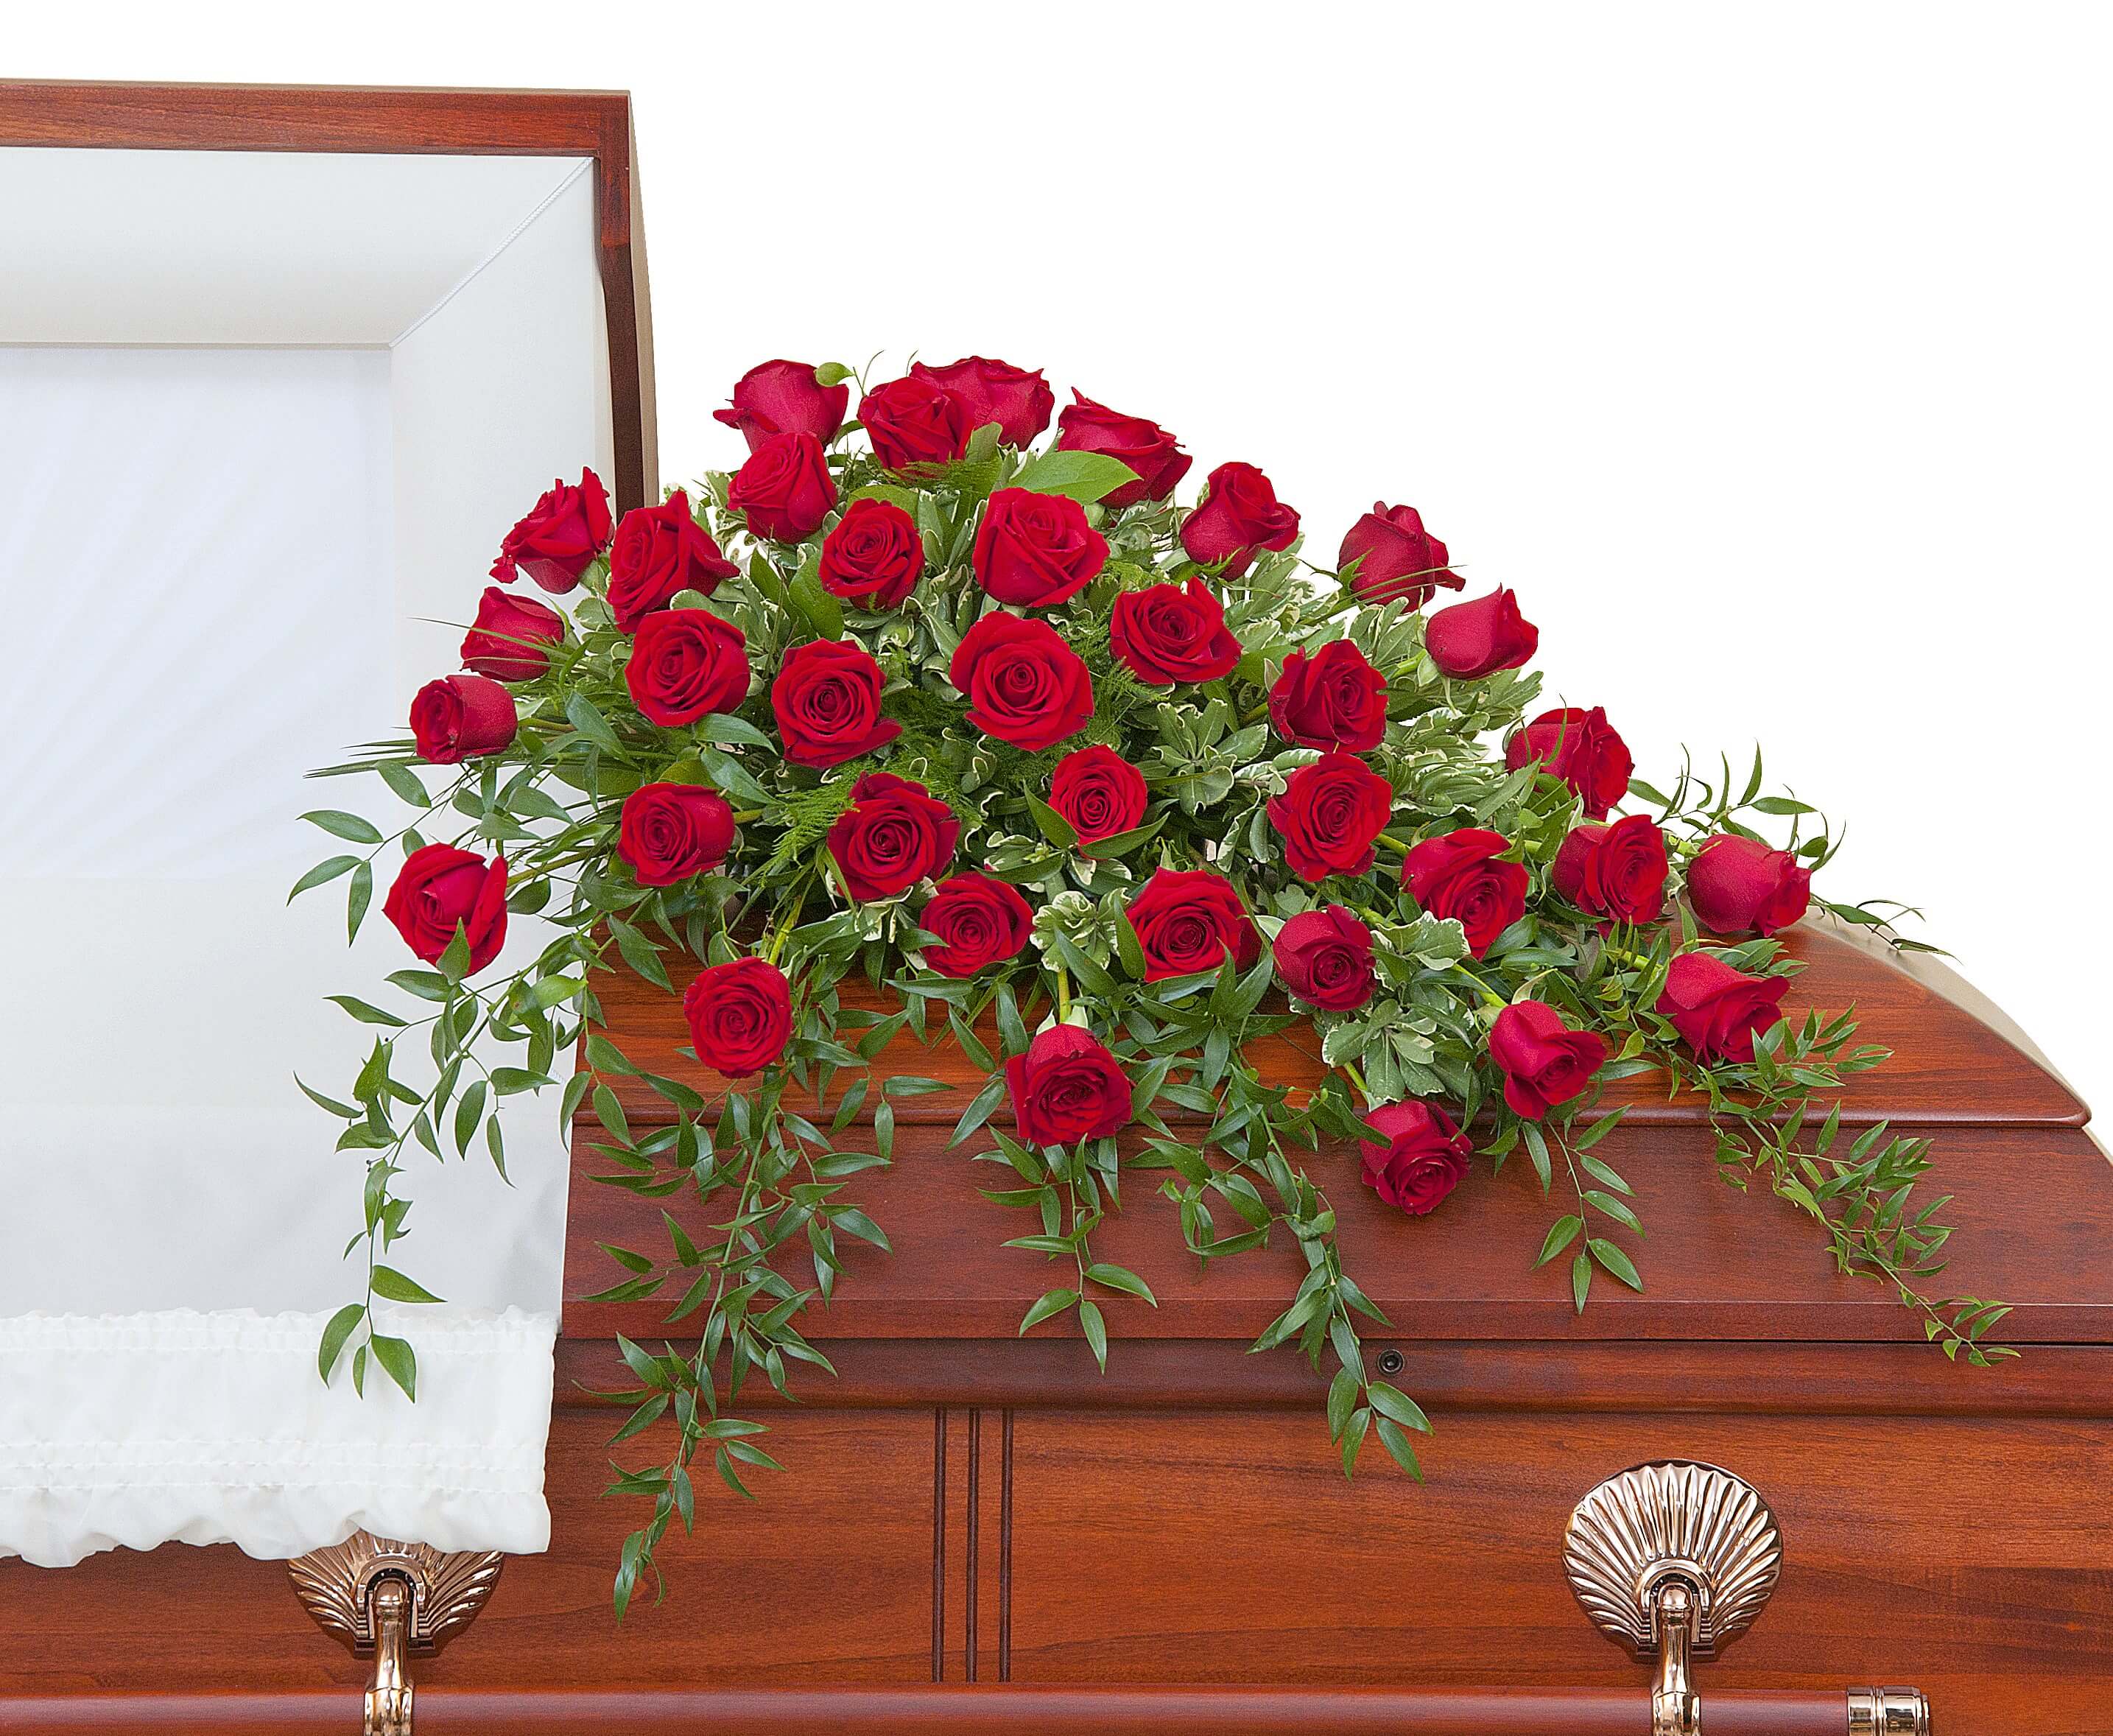 Simply Roses Deluxe Casket Spray - Three dozen Roses with premium foliage in a casket spray.